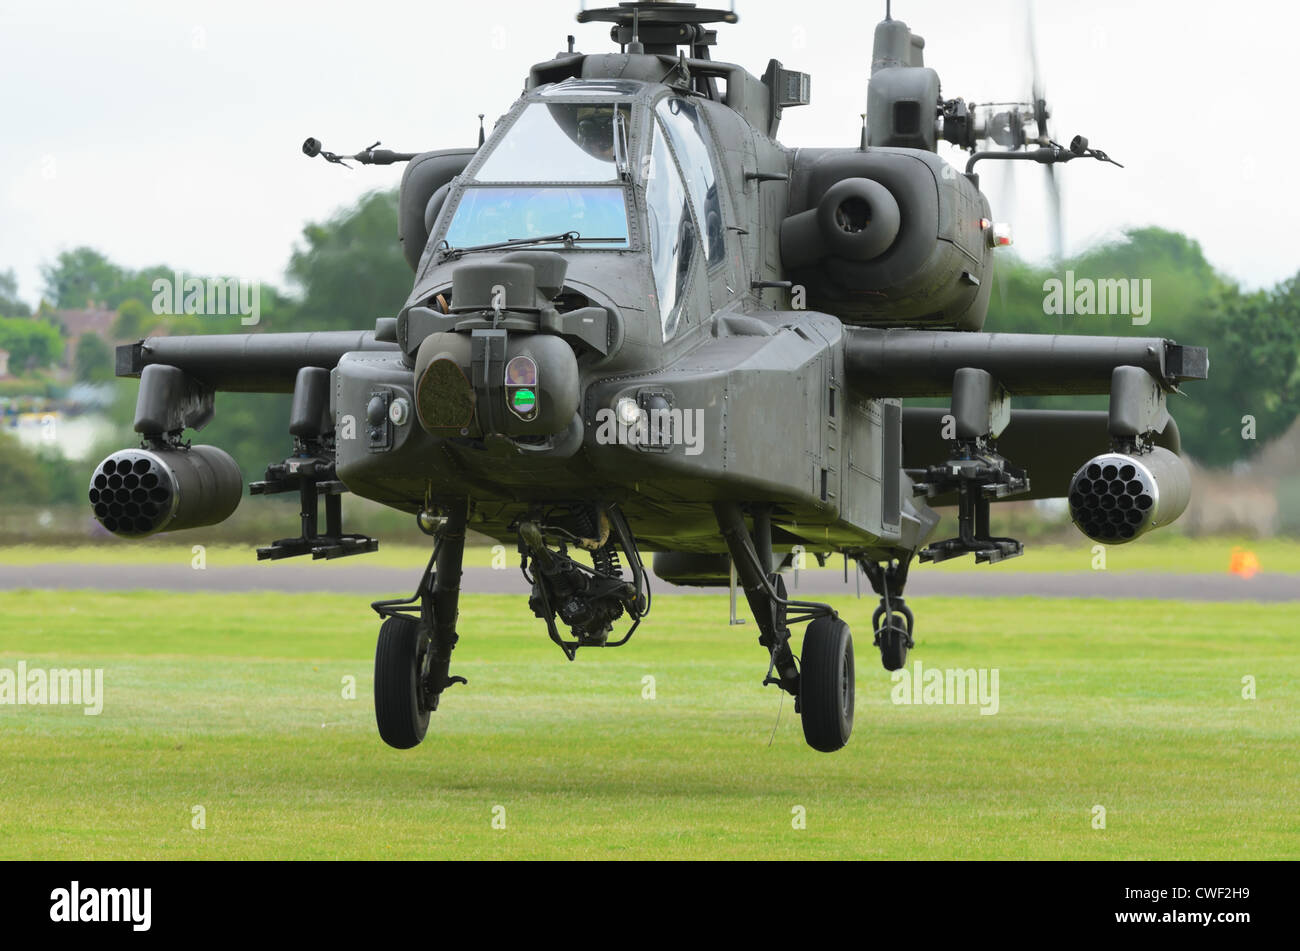 COSFORD, SHROPSHIRE, ENGLAND - JUNE 17: Boeing AH-64 Apache attack helicopter taking off for display Stock Photo